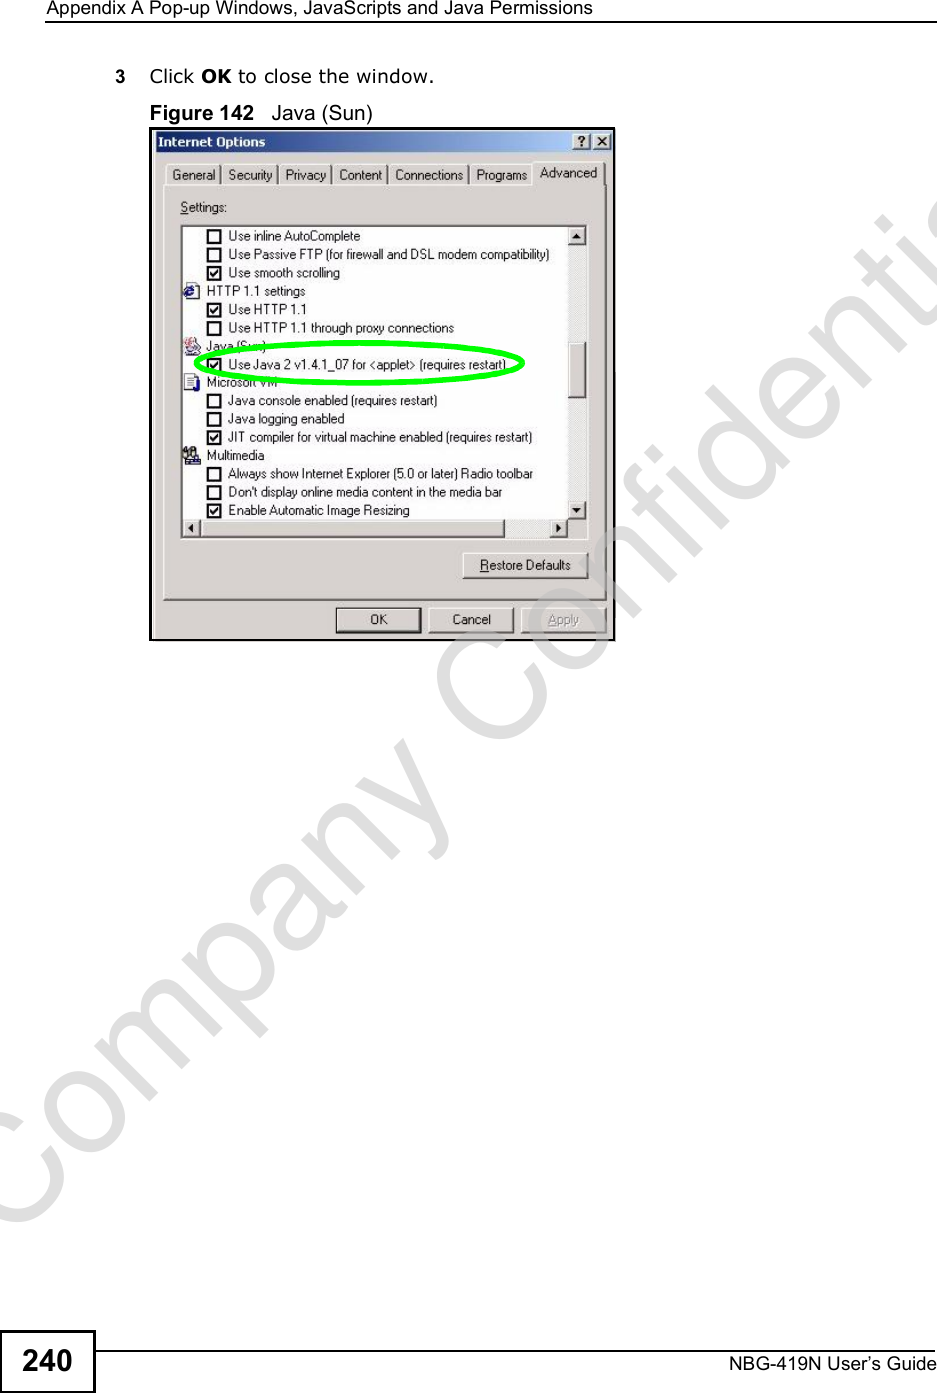 Appendix APop-up Windows, JavaScripts and Java PermissionsNBG-419N User s Guide2403Click OK to close the window.Figure 142   Java (Sun)Company Confidential